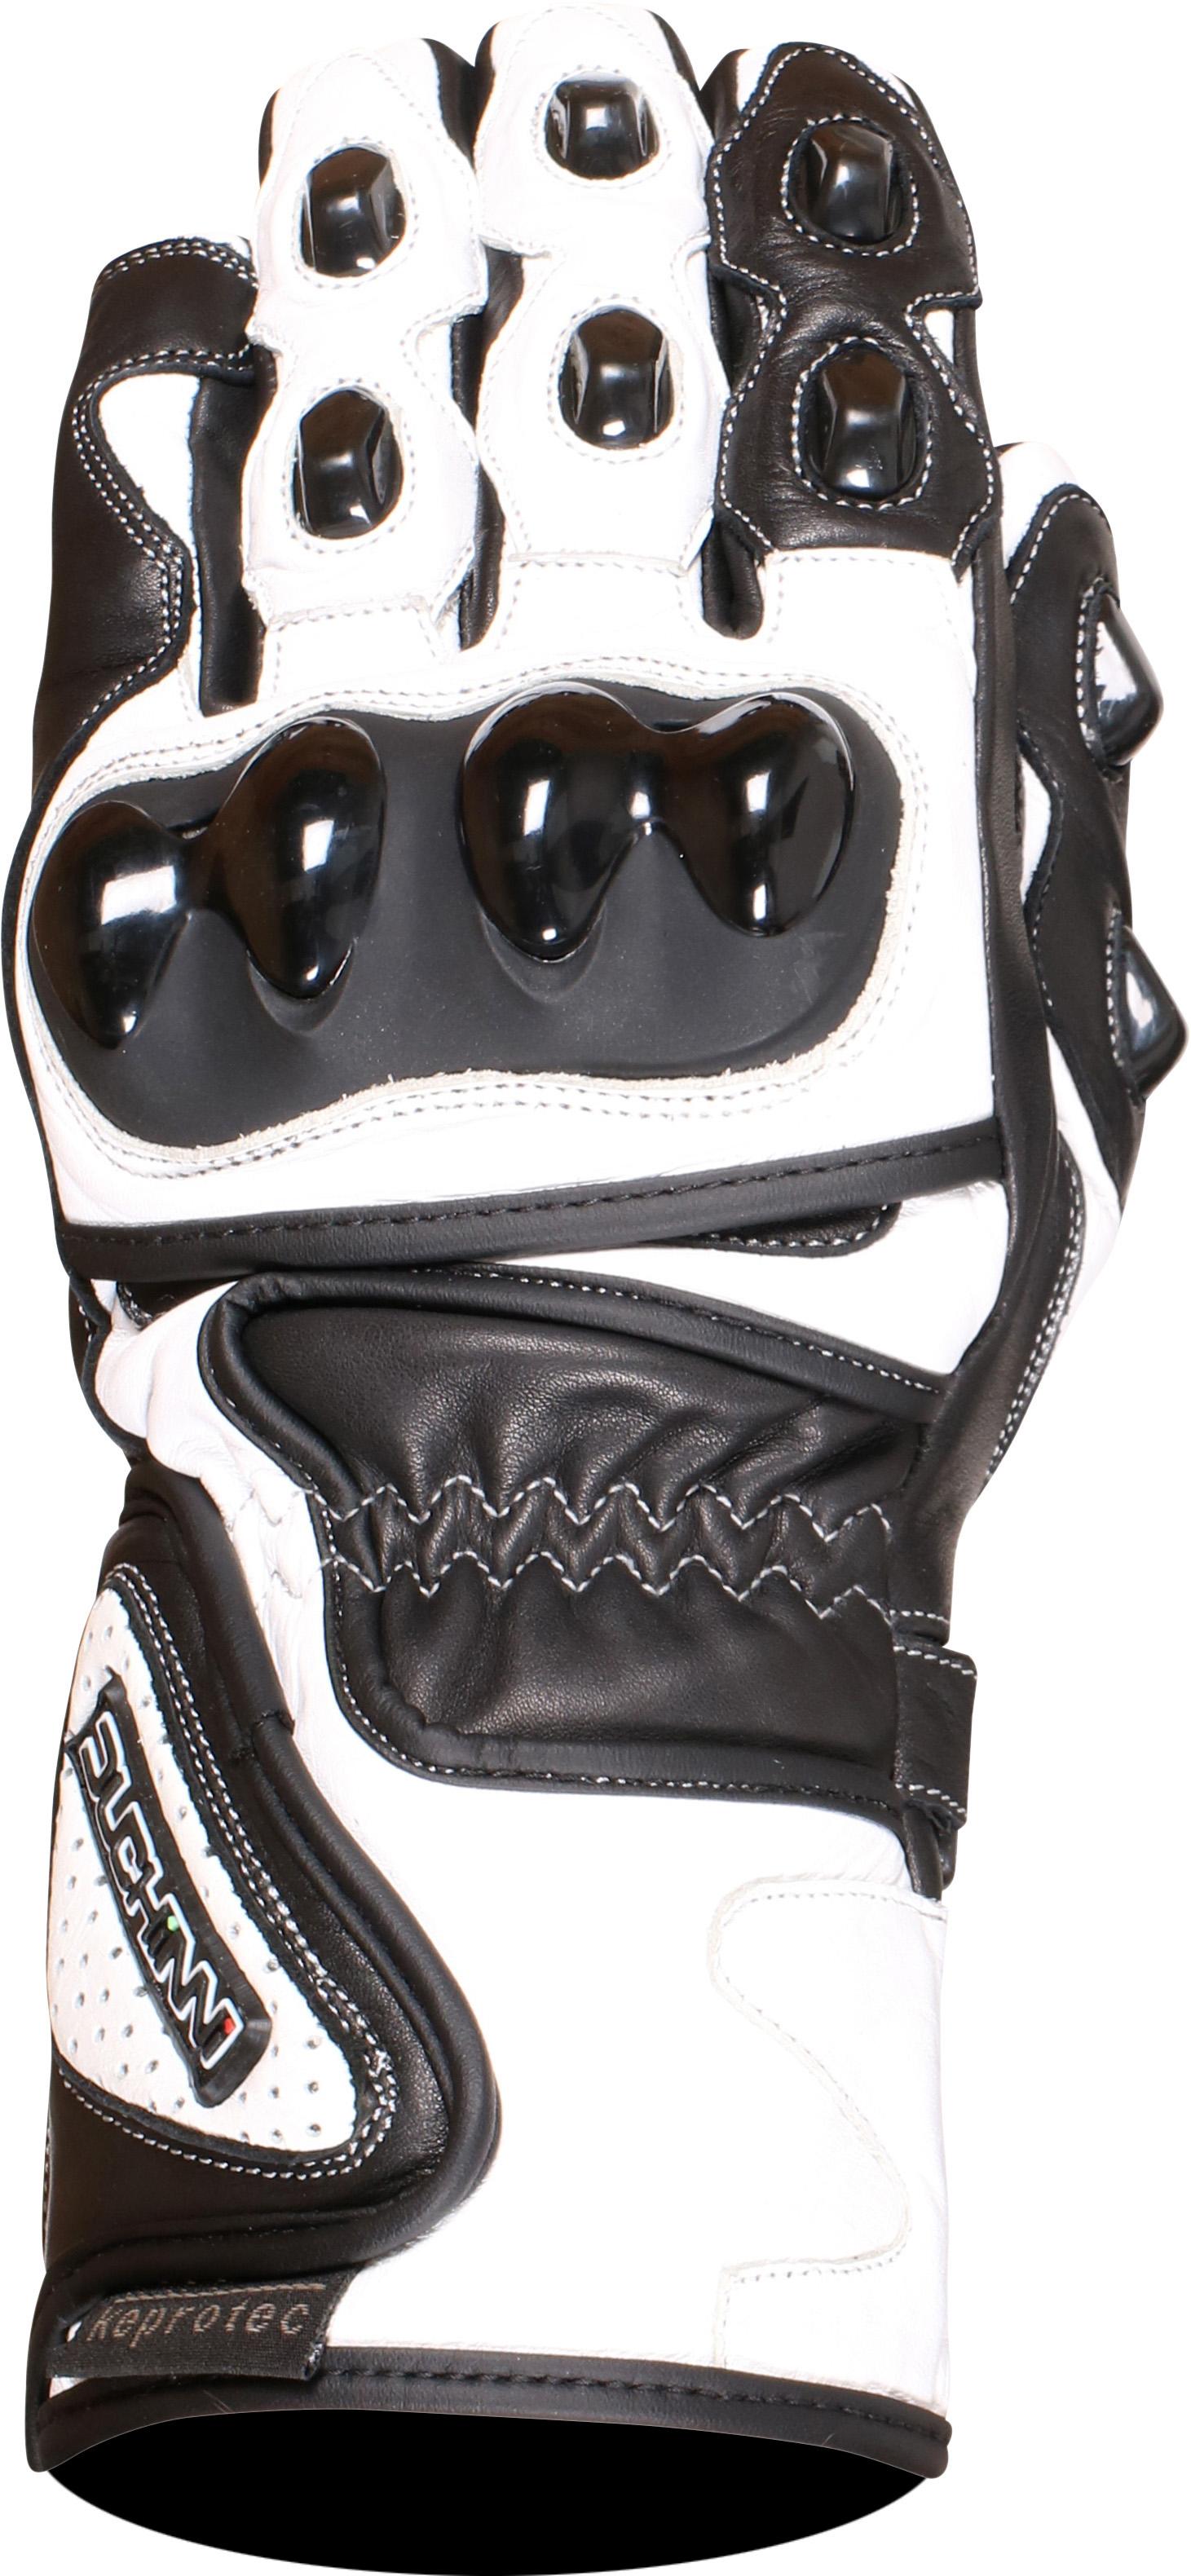 Duchinni Dr1 Motorcycle Gloves - Black And White, S